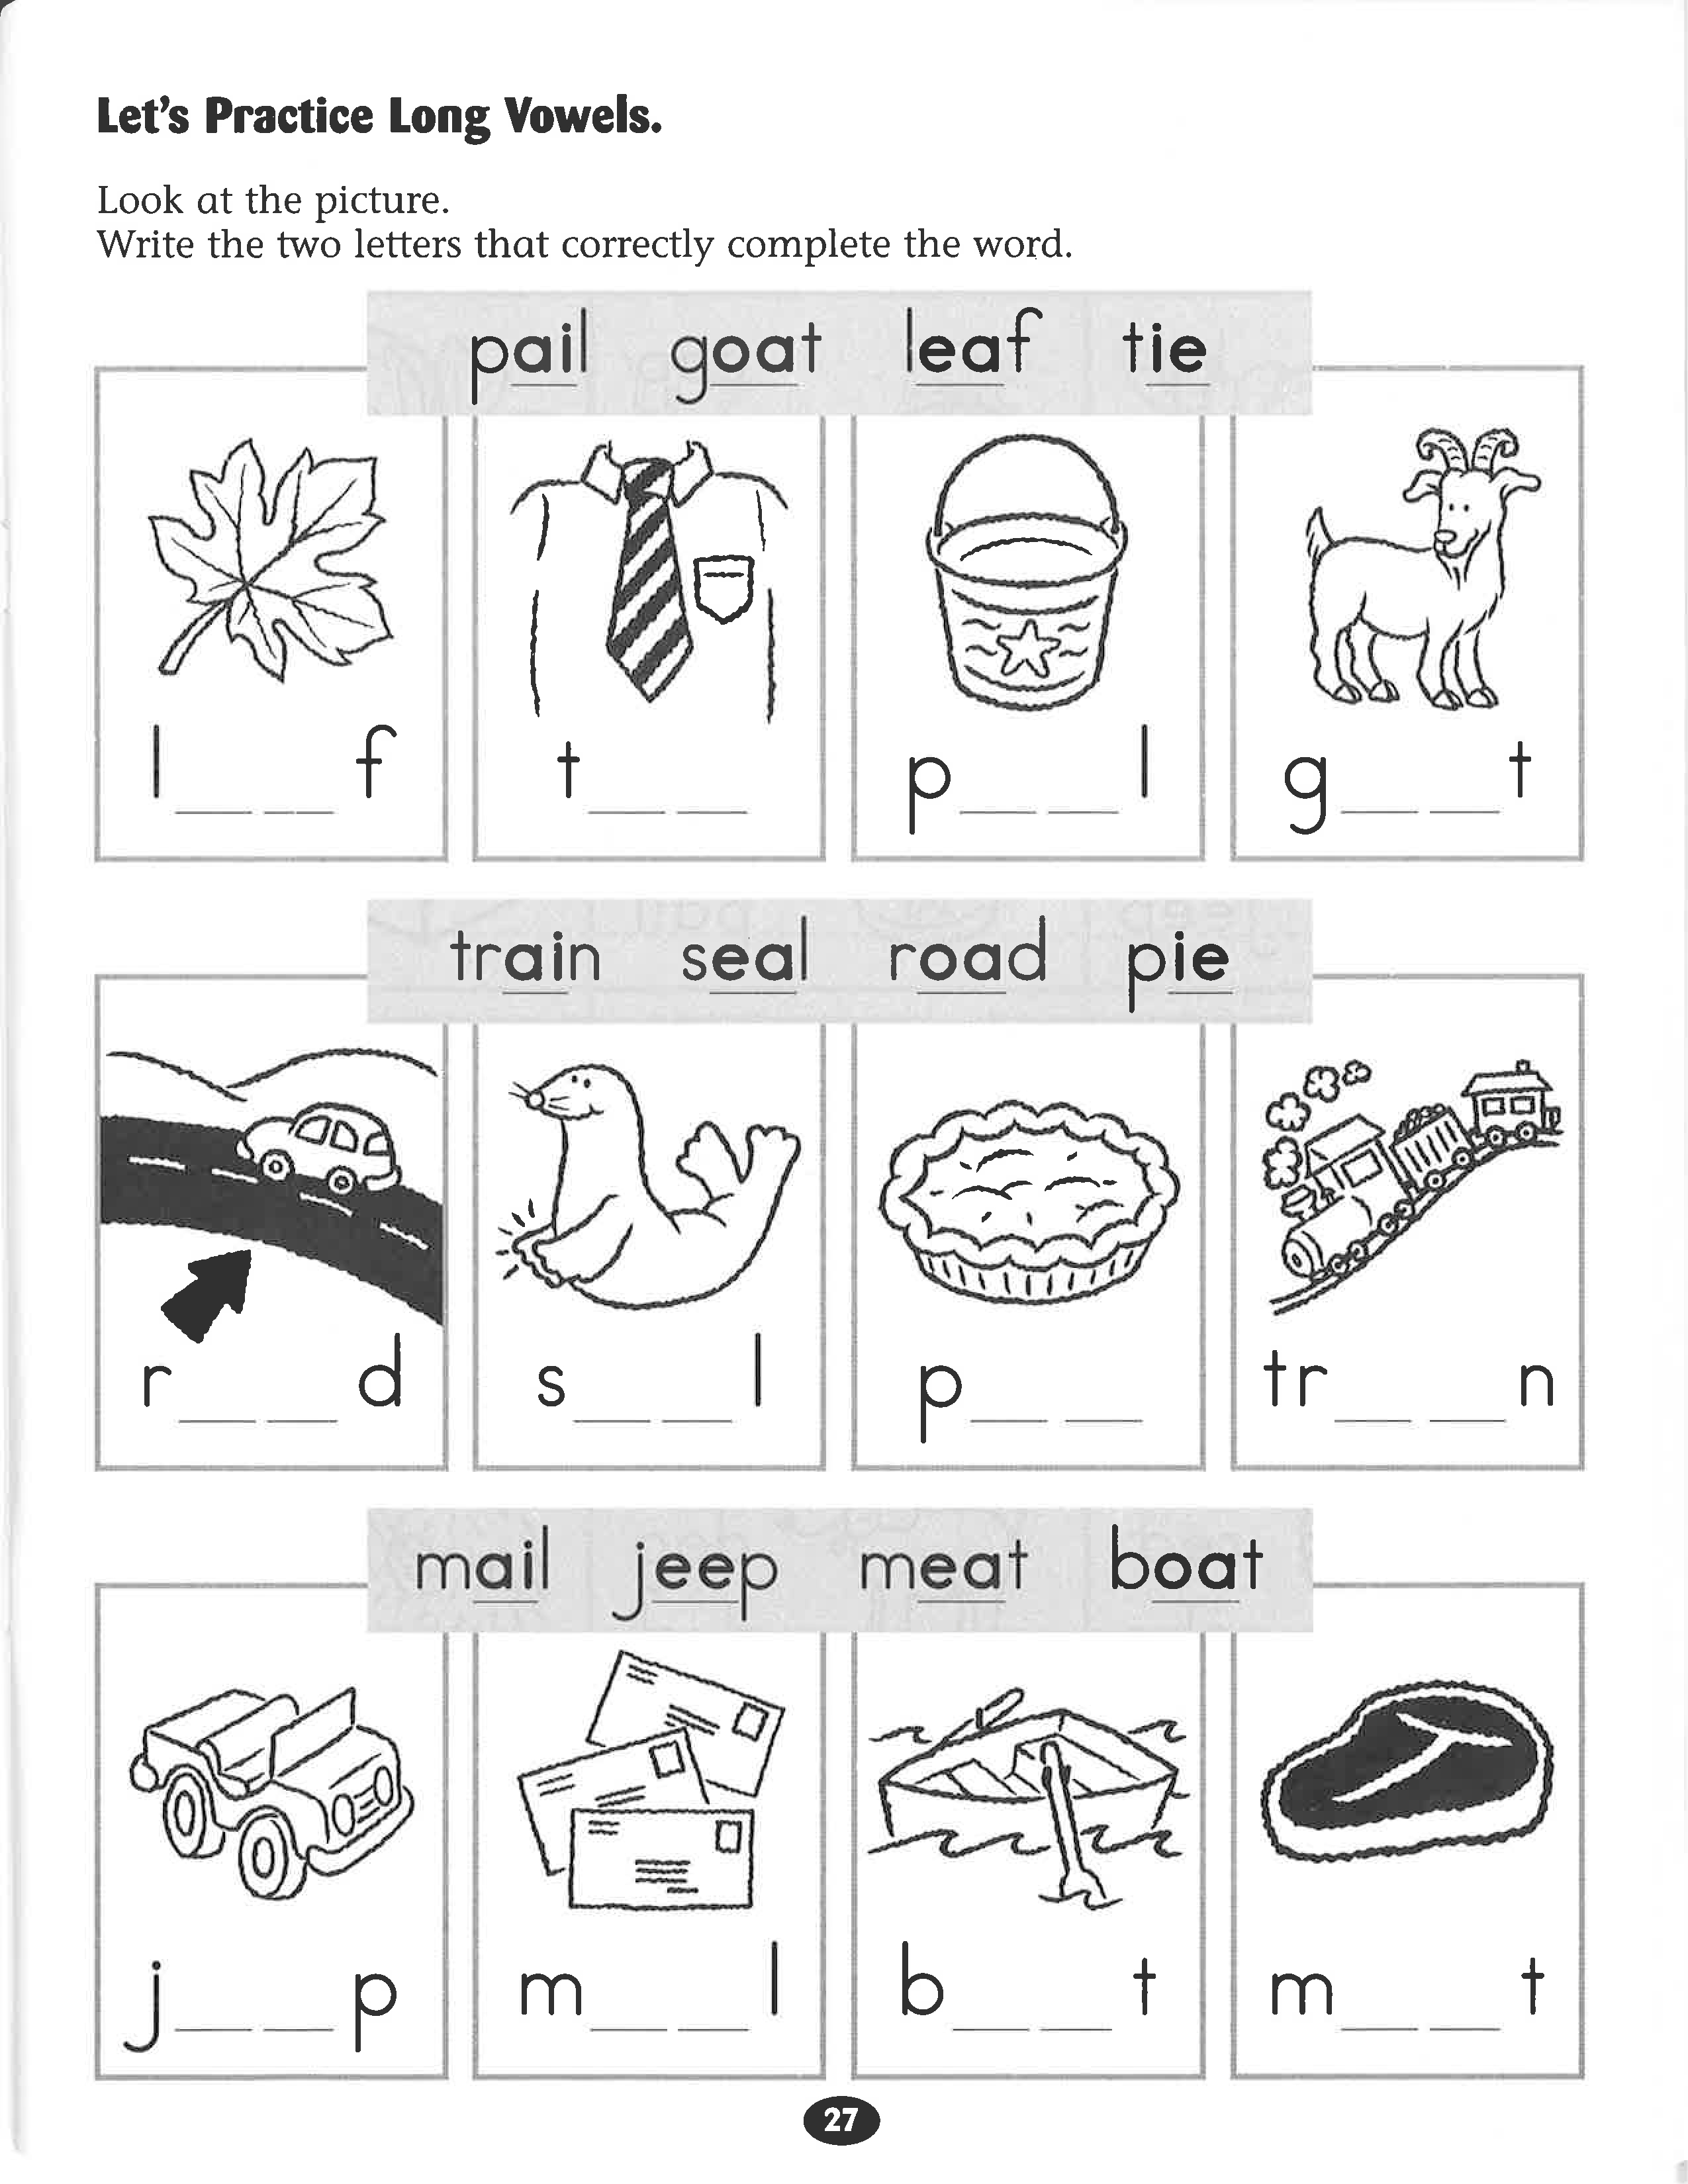 how-to-learn-to-read-english-free-lori-sheffield-s-reading-worksheets